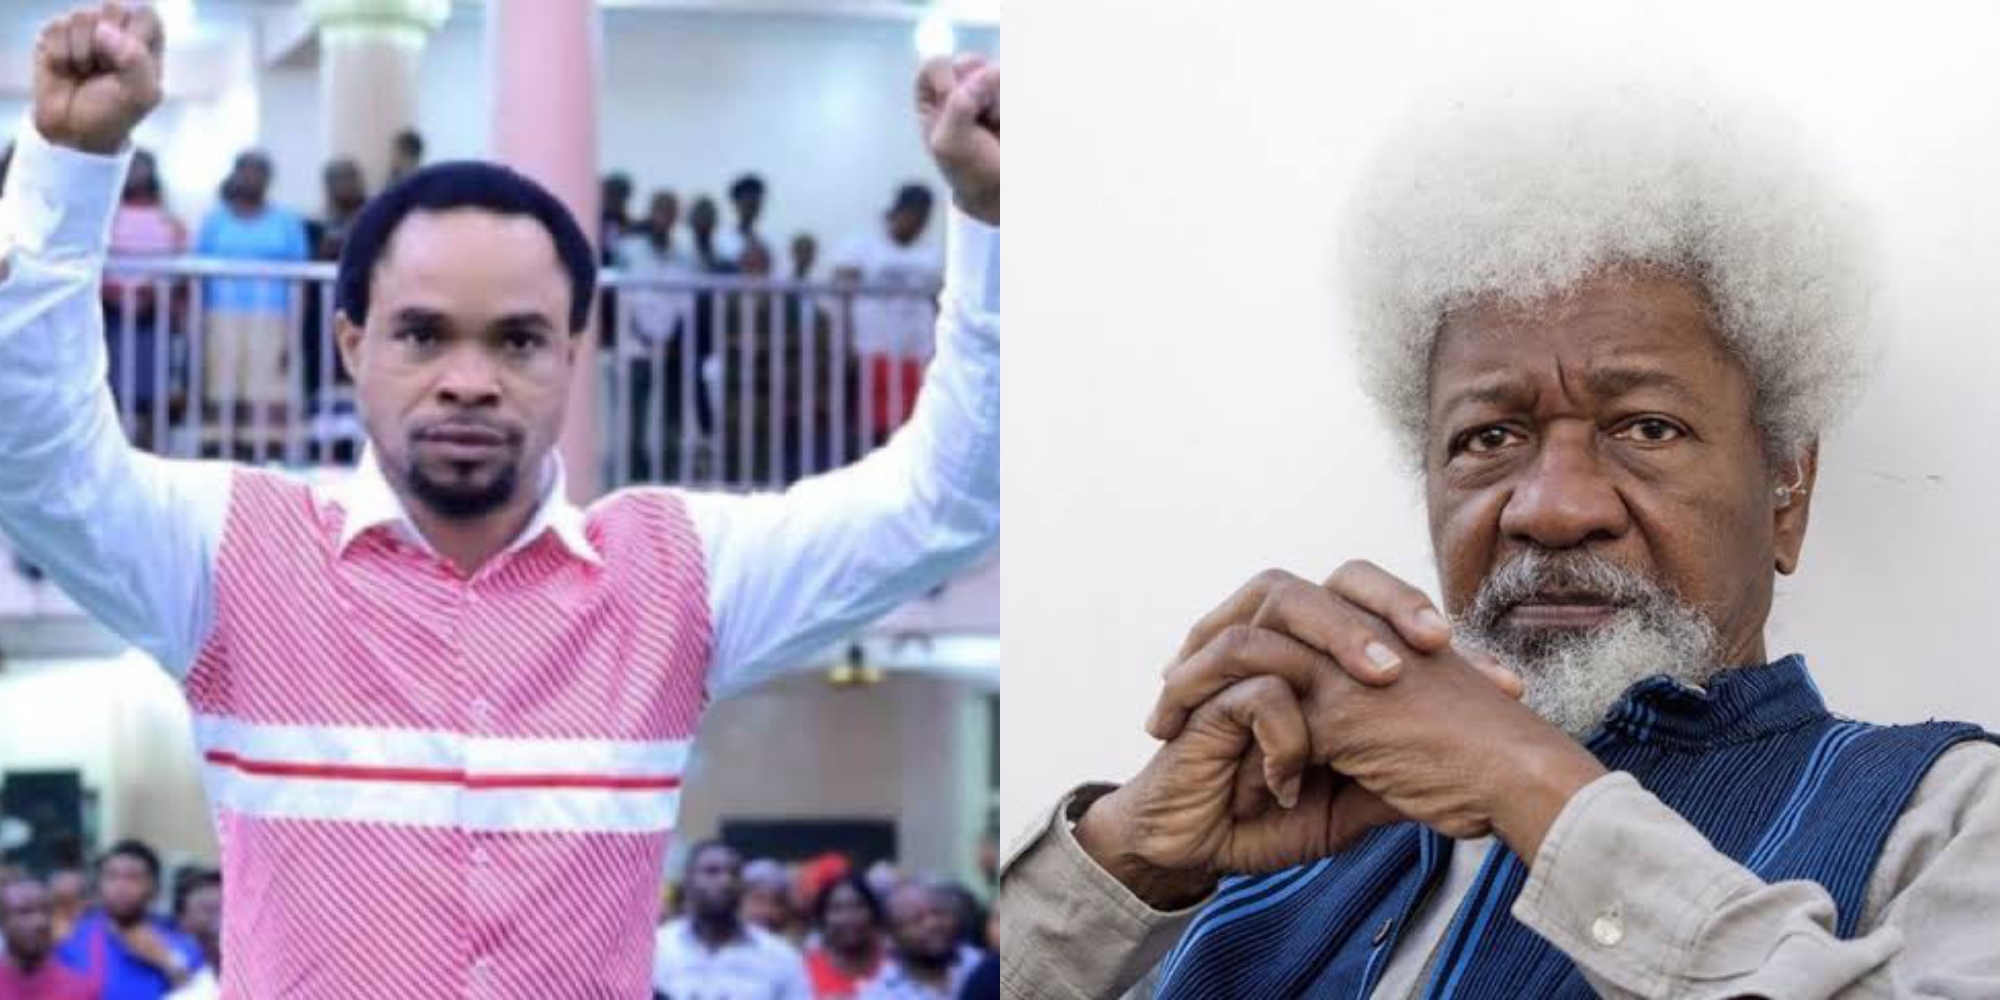 2023: Prophet Odumeje decides to challenge Soyinka into a debate